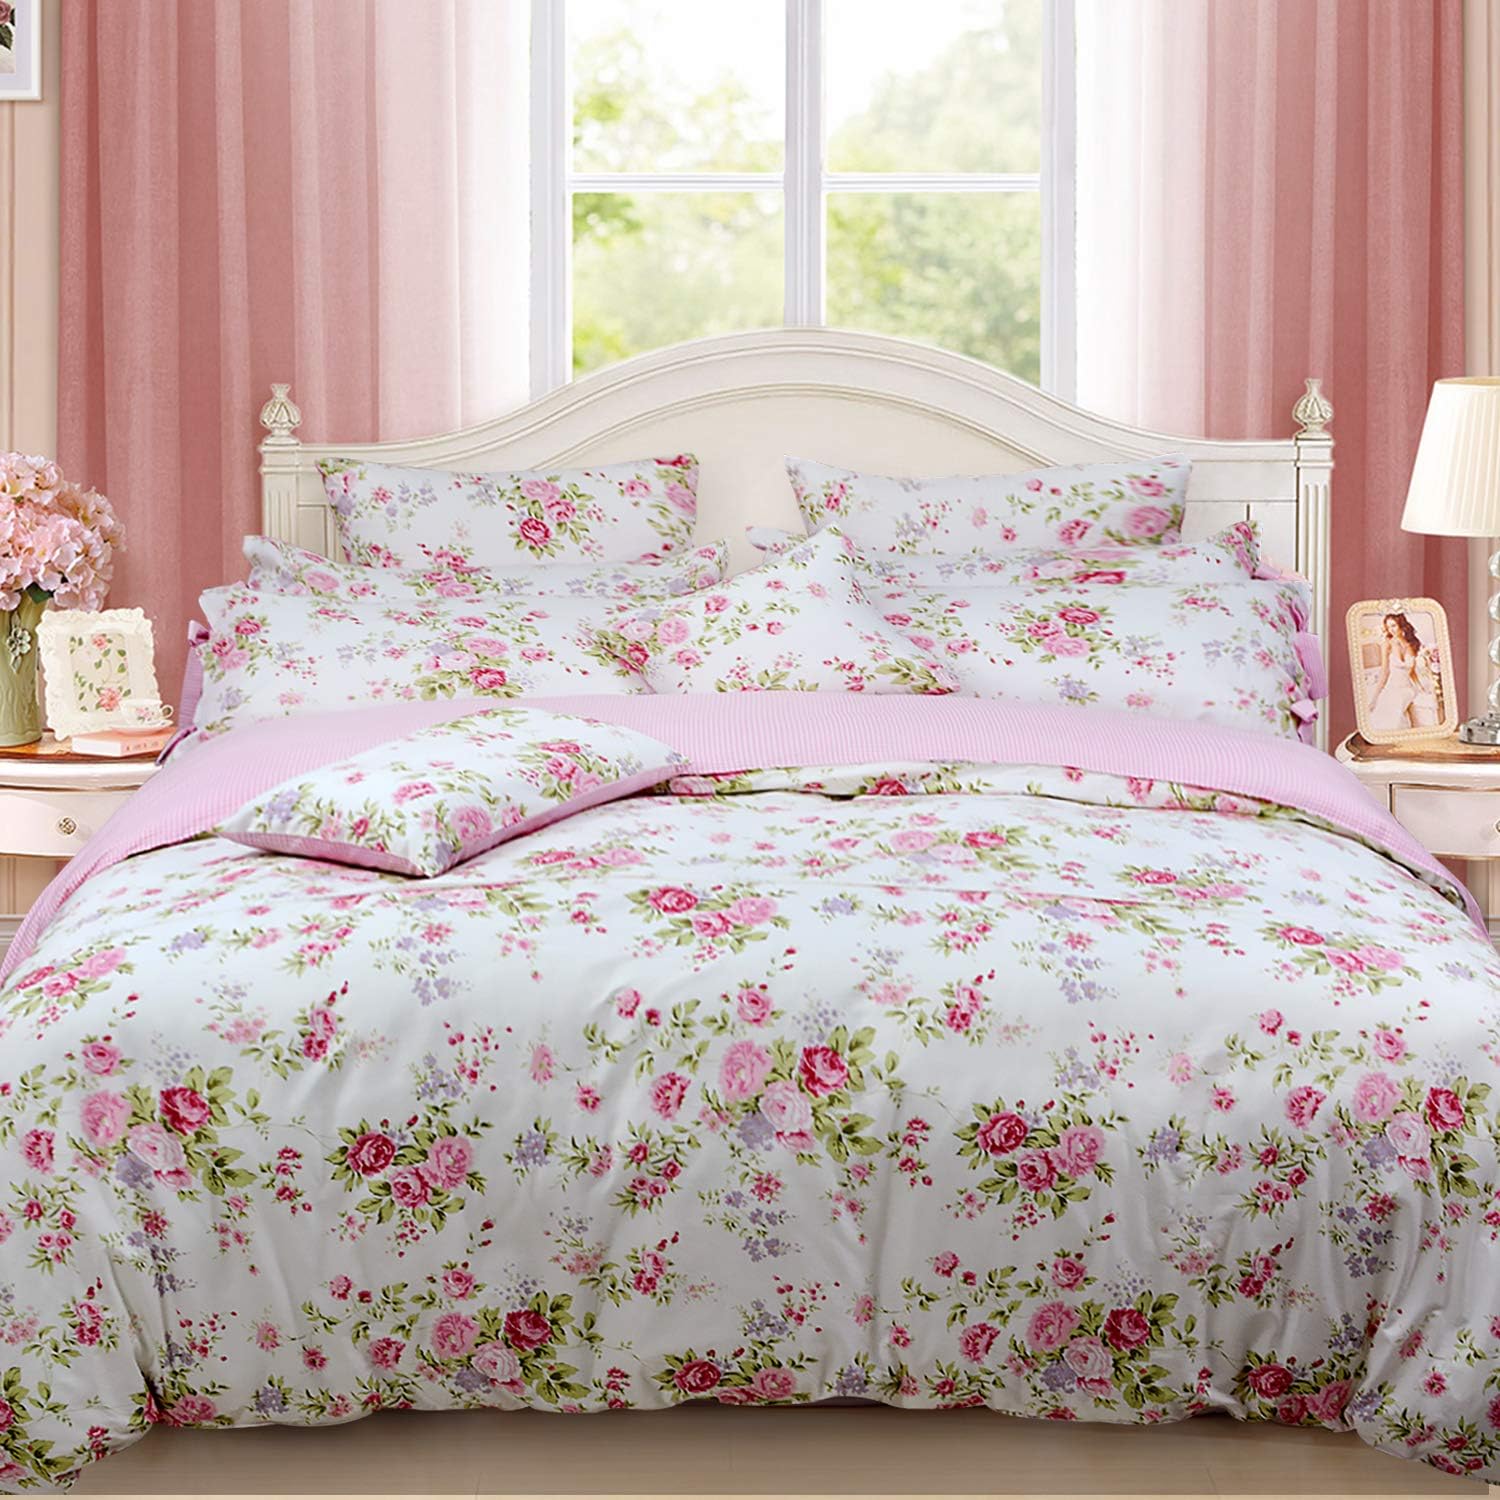 FADFAY Shabby Rose Floral Duvet Cover Pink Plaid Girls Bedding Set 100% Cotton Ultra Soft Bed Sheet Set,5Pcs (1 Duvet Cover +1 Fitted Sheet+ 1 Flat Sheet +2 Standard Pillowcases), Twin Size